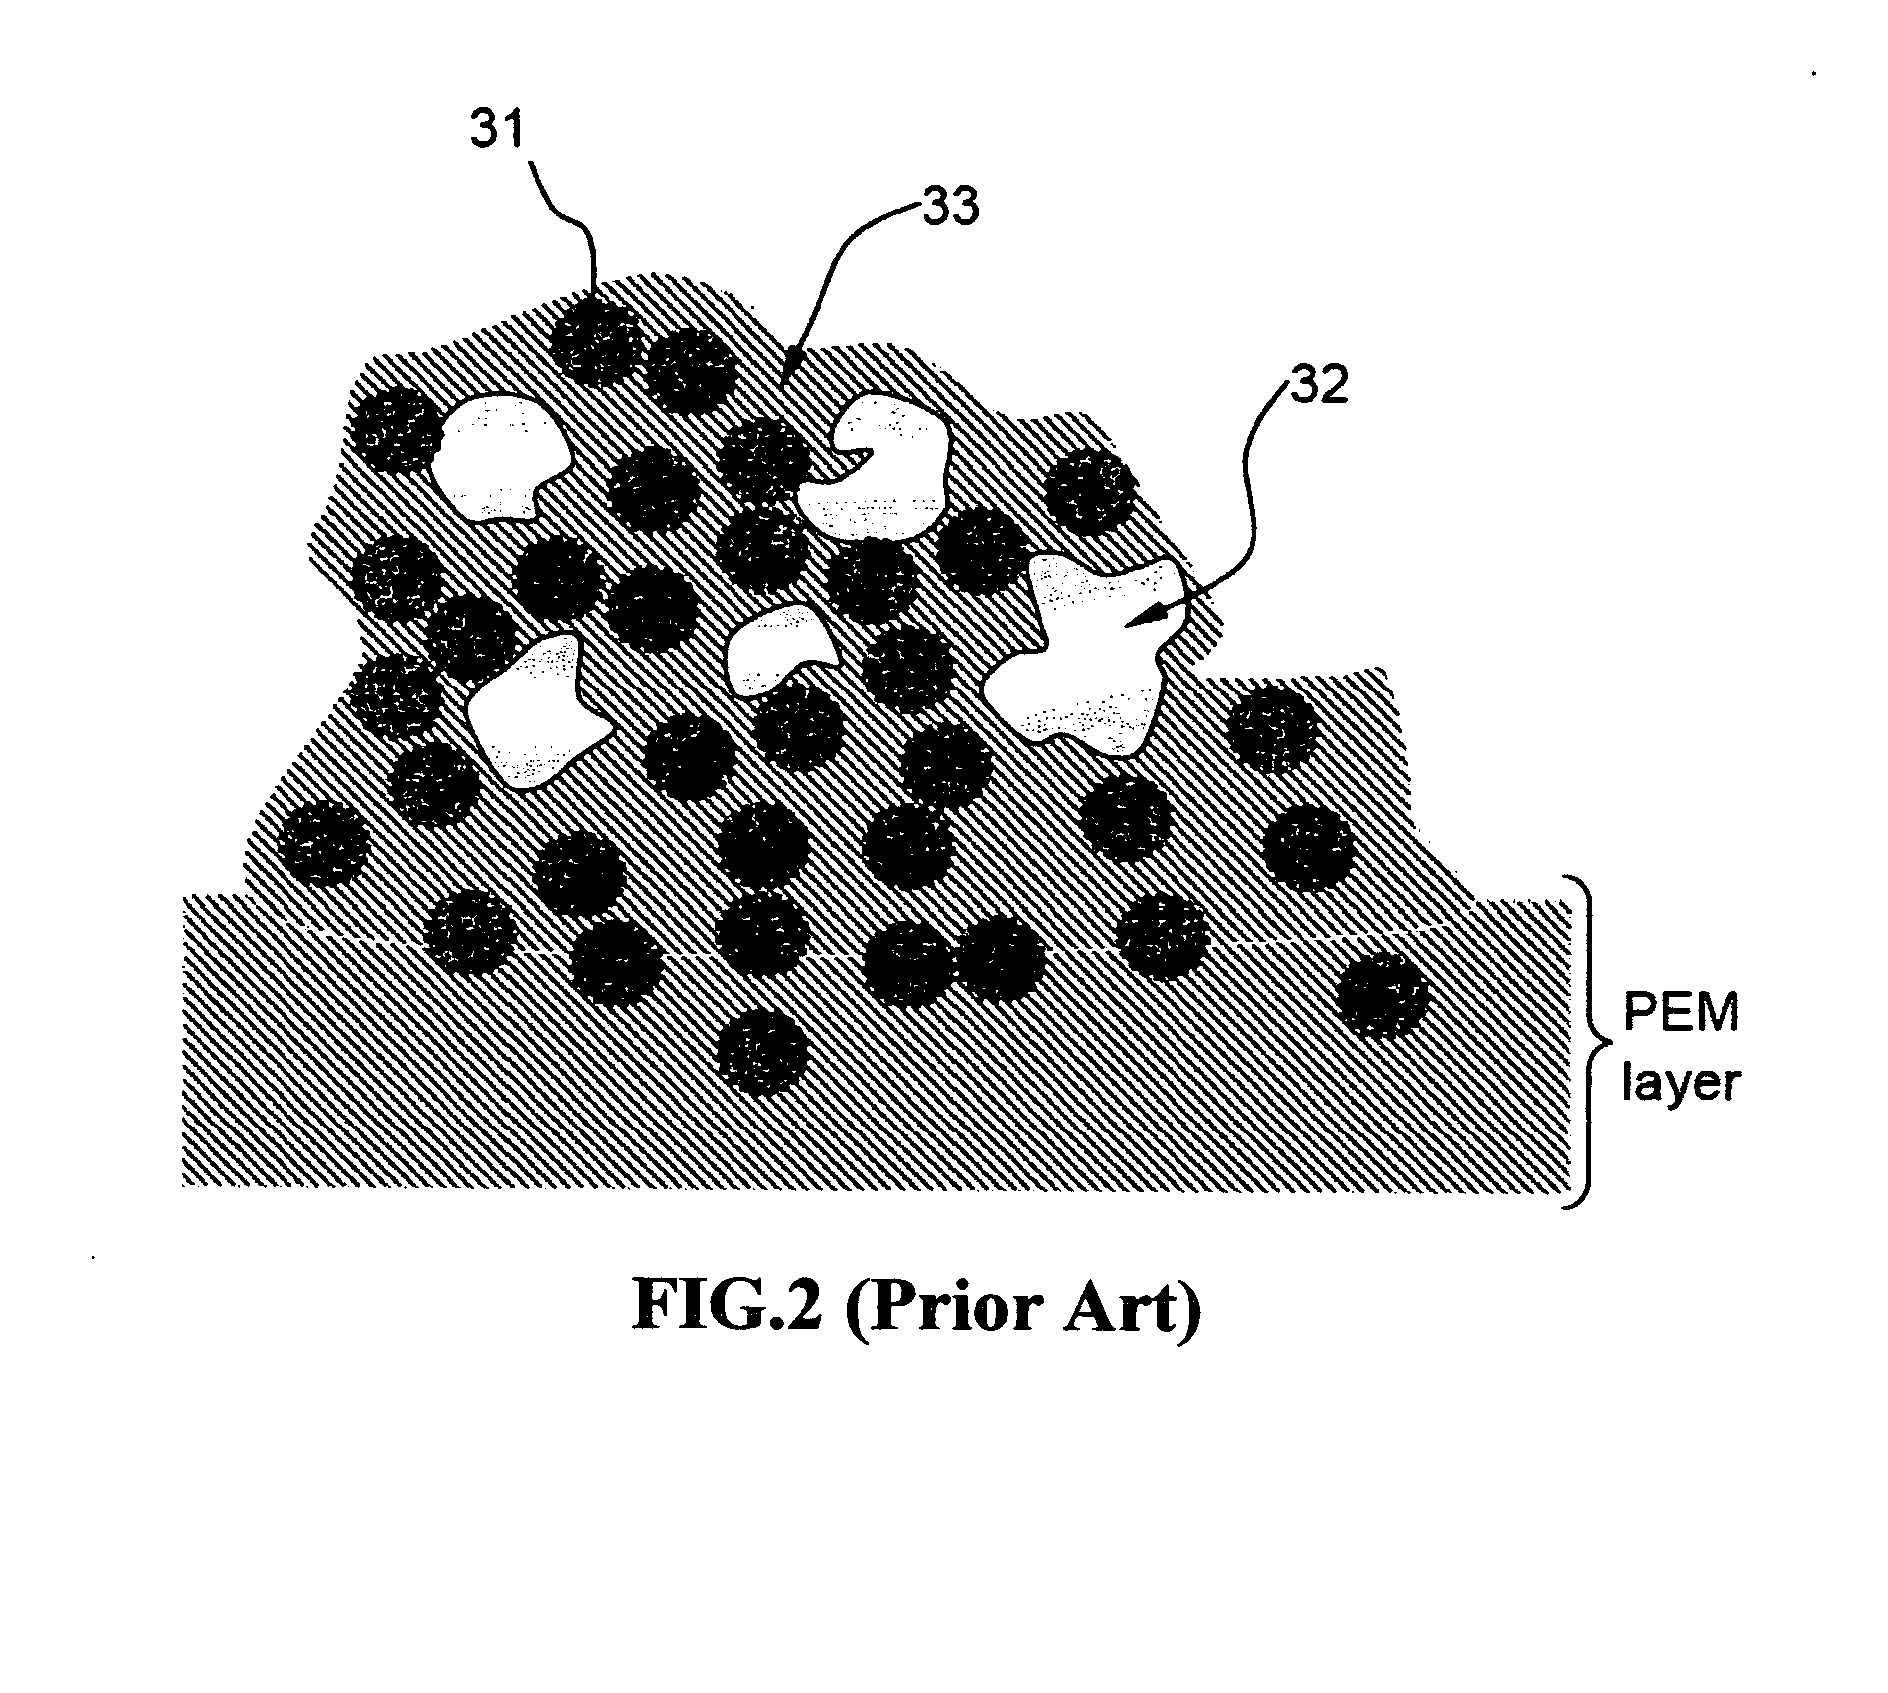 Electro-catalyst compositions for fuel cells